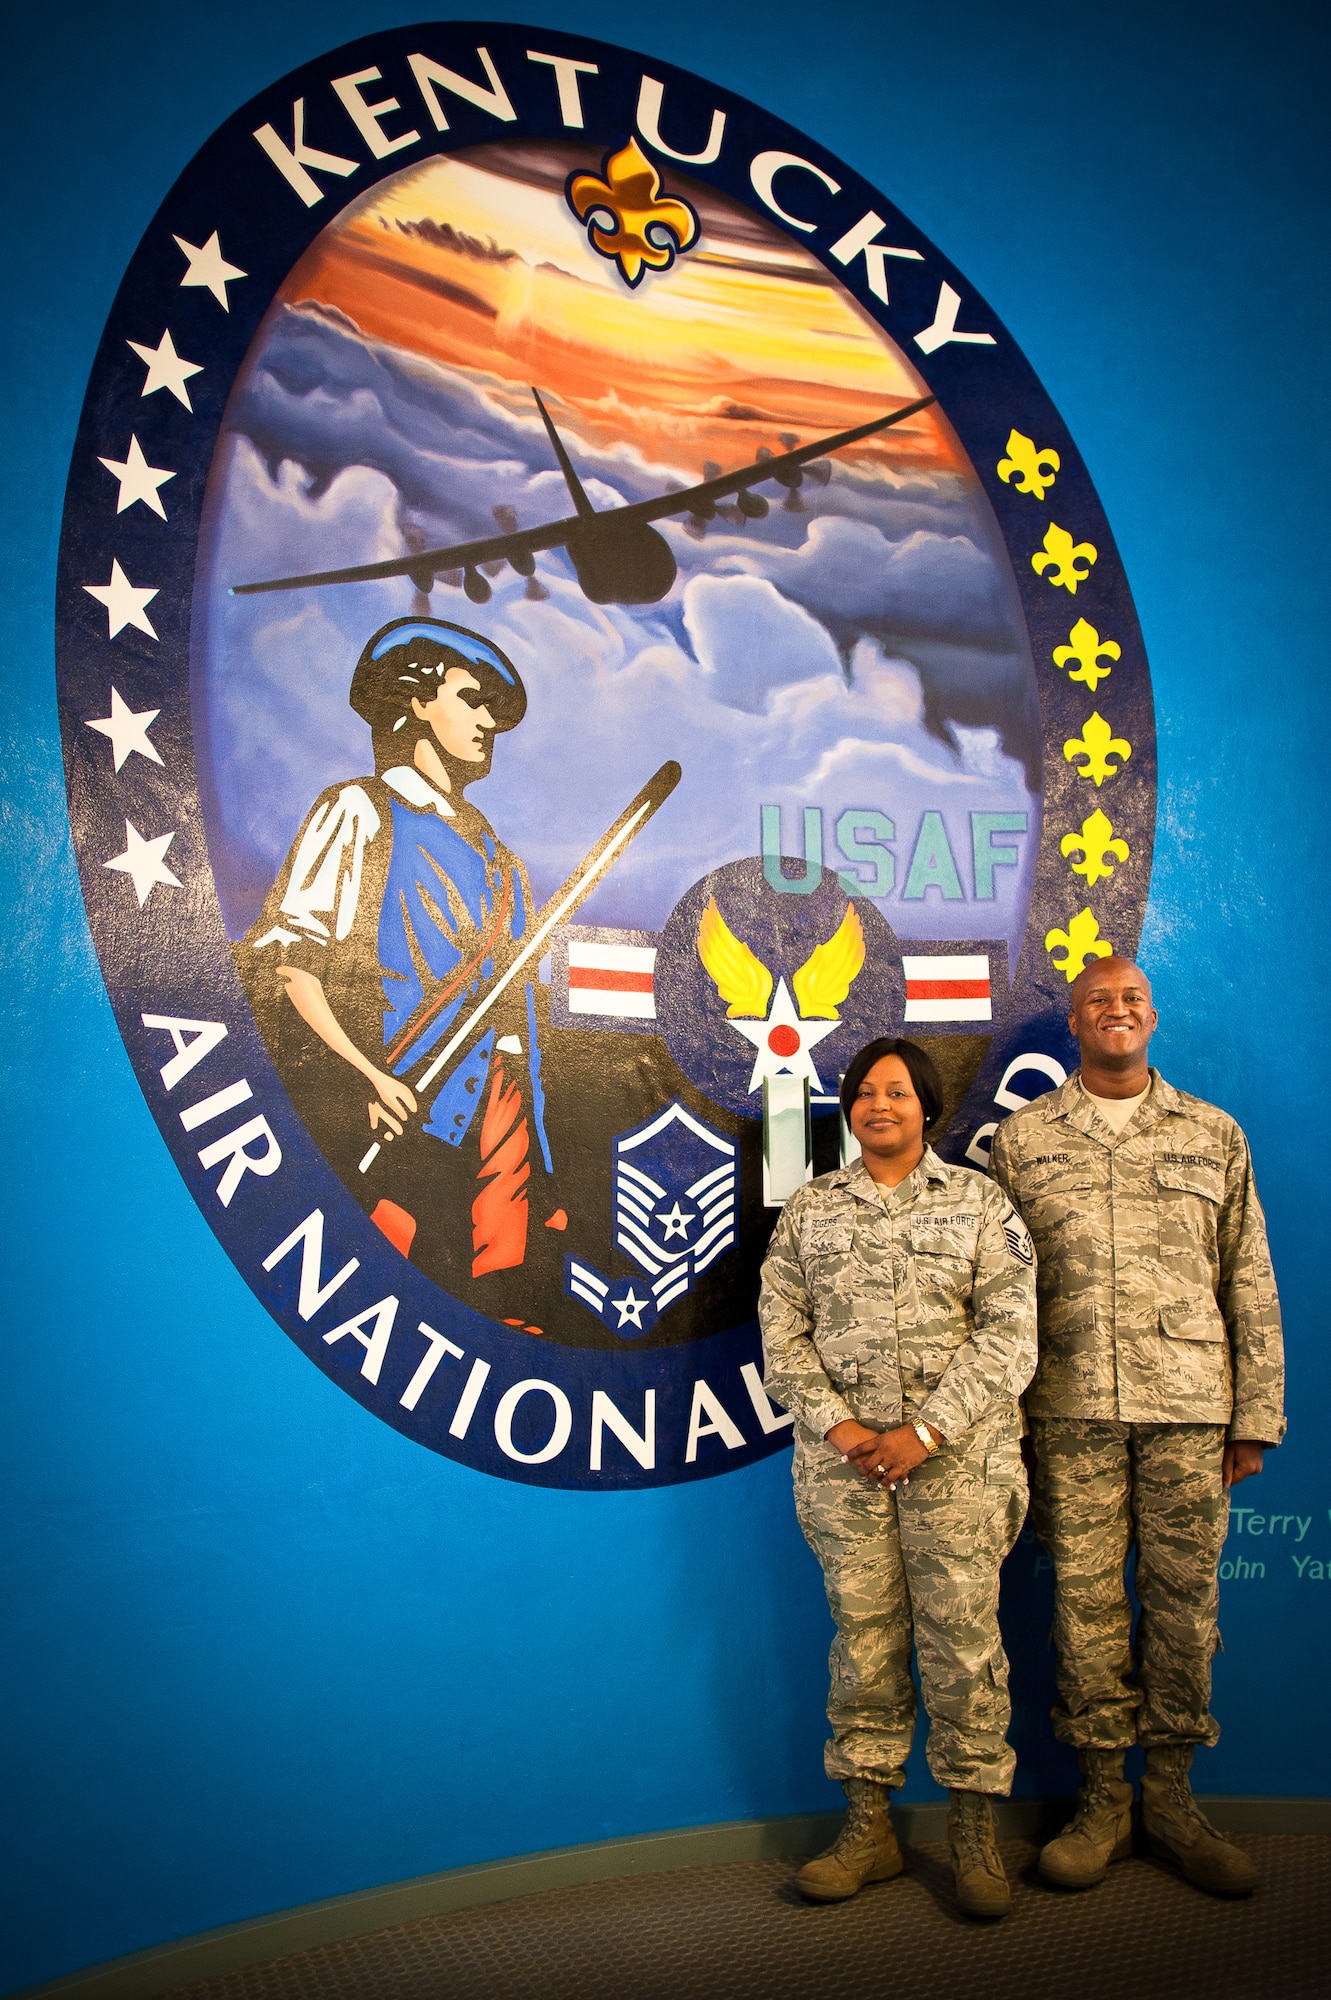 The Kentucky Air National Guard’s Master Sgt. Cynthia Rogers and Tech. Sgt. Anthony Walker have been recognized by the National Guard Bureau for outstanding recruiting and retention performance. Sergeant Rogers was named Air National Guard Retention Office Manager of the Year for Region 4, a geographic area that includes nine states and the District of Columbia, while Sergeant Walker was named ANG Production Recruiter of the Year for Region 4. (U.S. Air Force photo by Maj. Dale Greer)